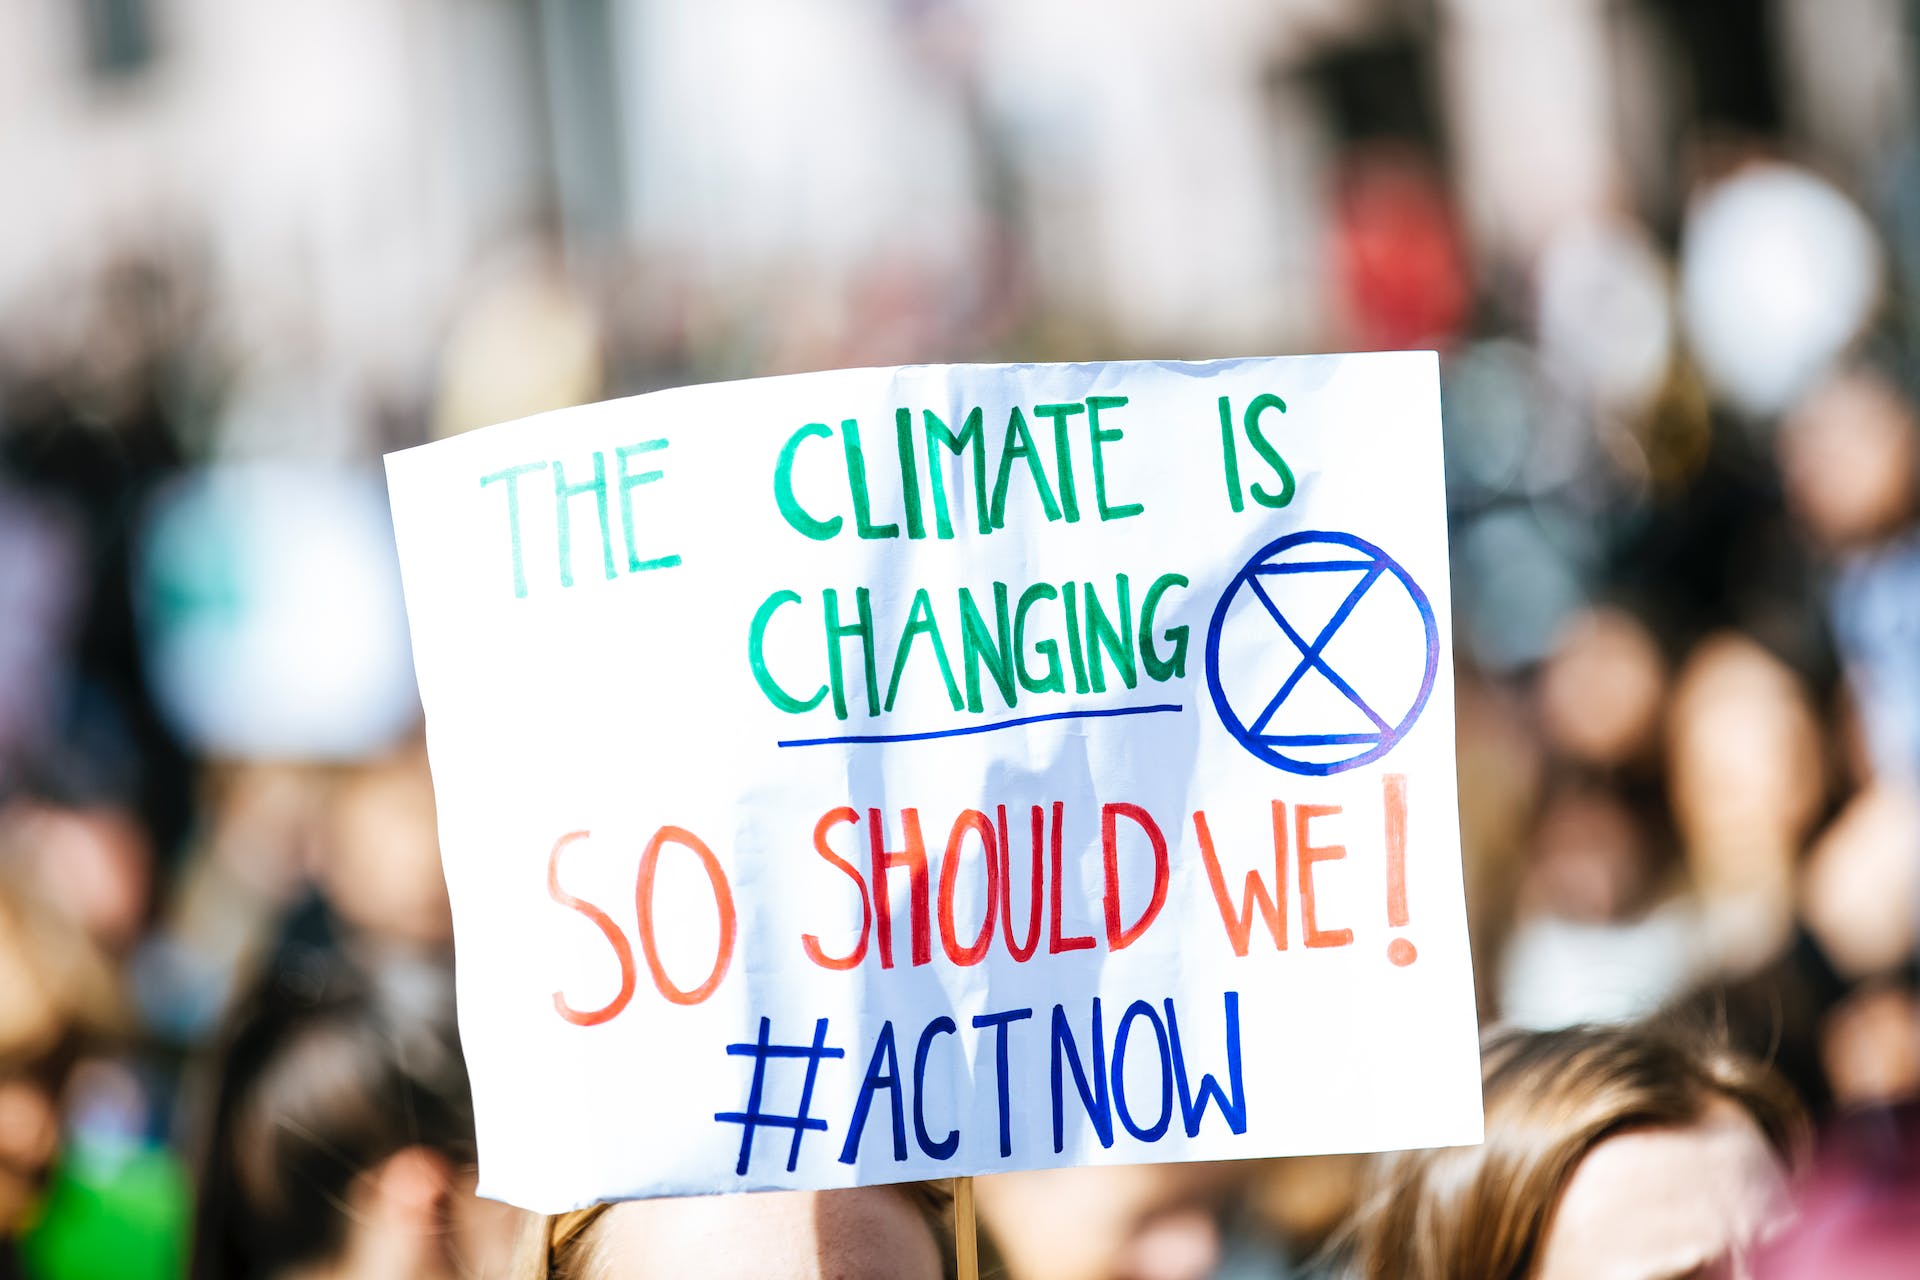 Climate change poster read as The climate is changing so should we. hashtag used with act now